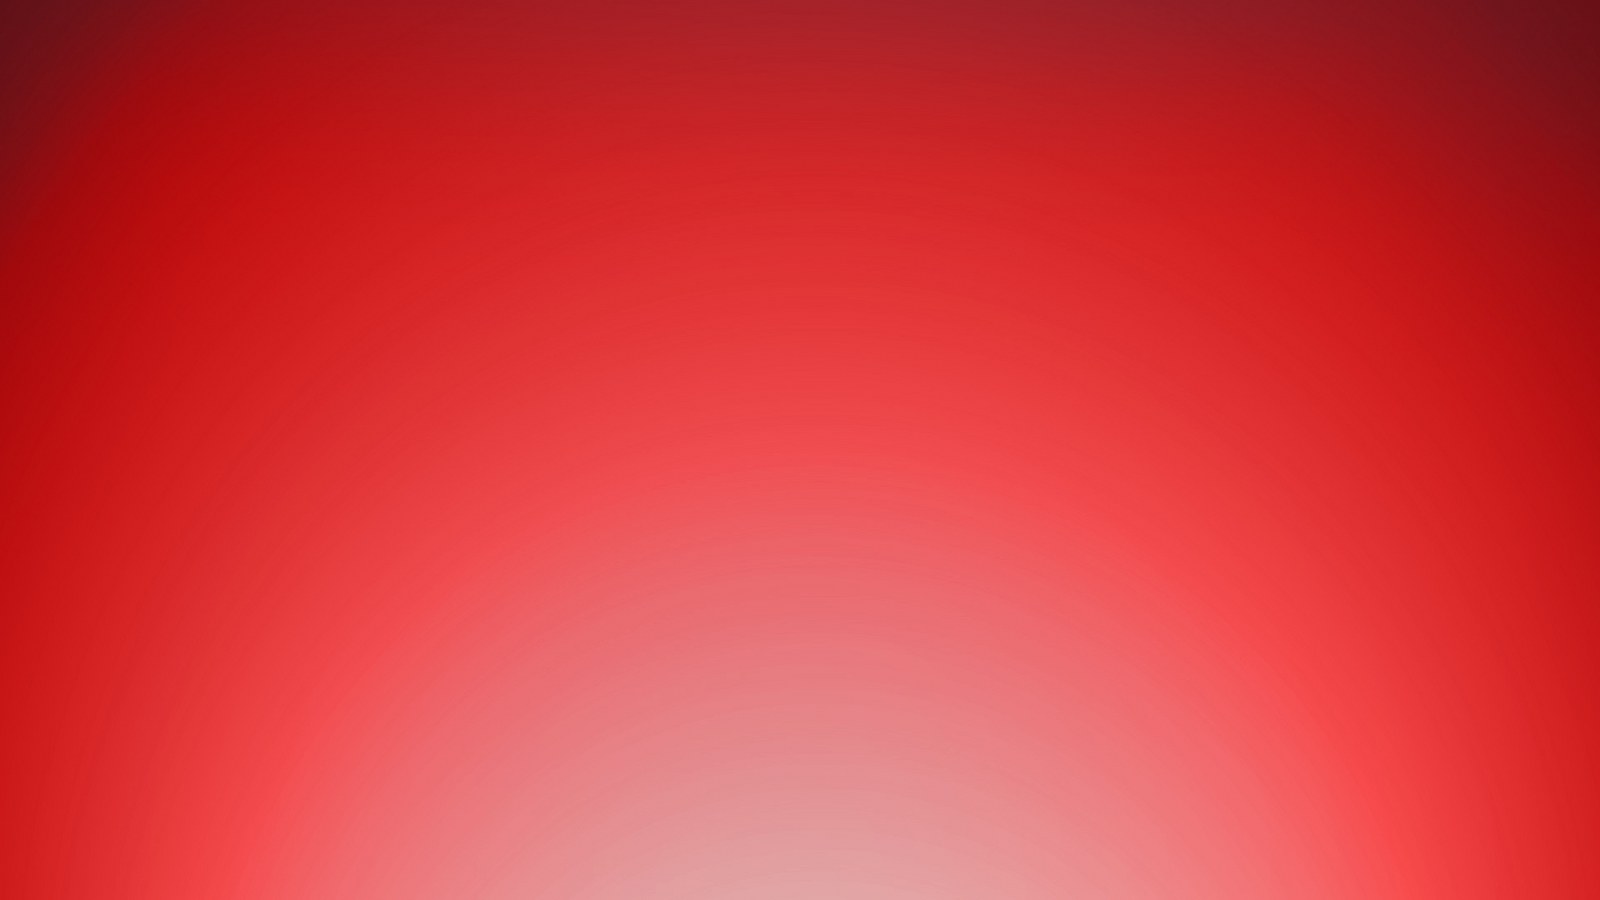 Background Red Wallpaper Gallery